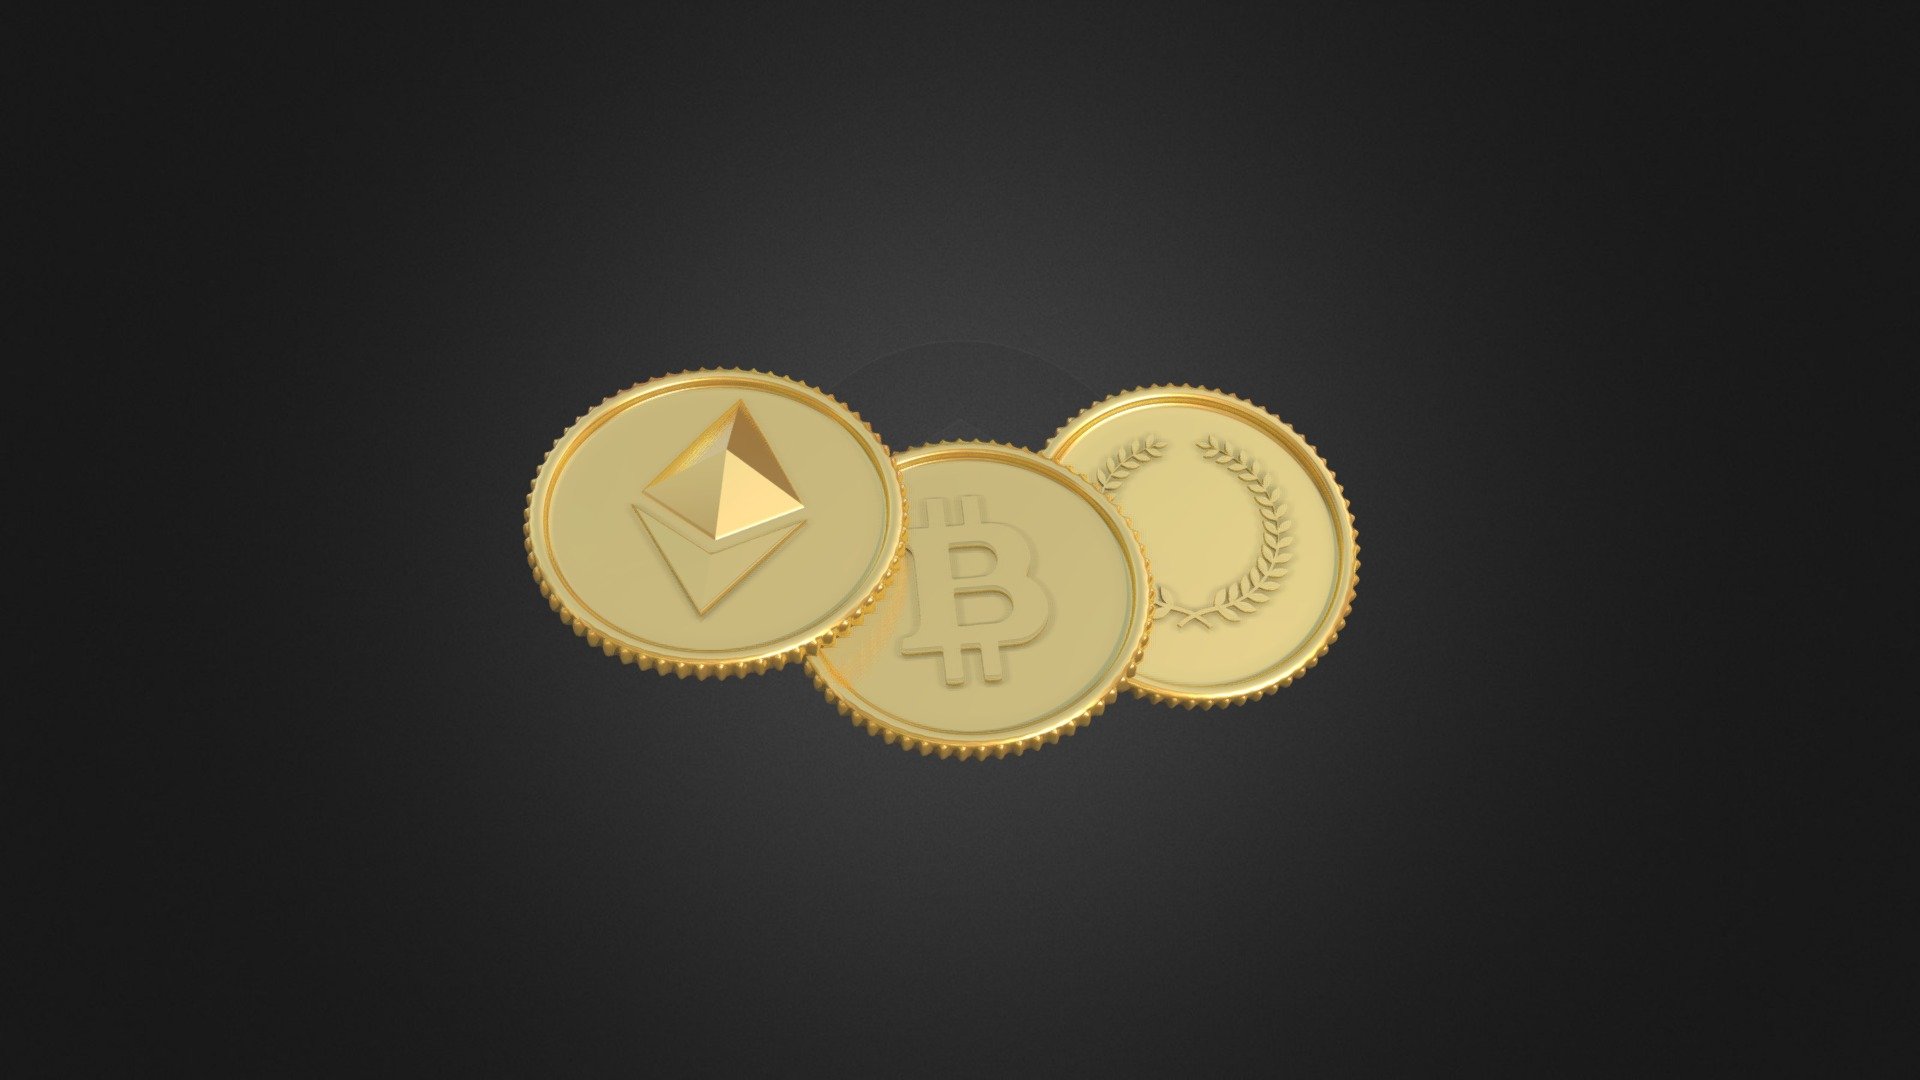 Ethereum ,bitcoin and Gold
You are free to download it and use it commercially 

*All you have to do it is to subscribe my two channels and give a shoutout 

Would hardly take 1 min*

Learn.nimagin
https://www.youtube.com/channel/UCtlK_OSLs2TQdhqwbeS0x0A/videos

nimagin
https://www.youtube.com/channel/UCaq5KrnpHKz5uSFYI9eCvrg/videos - Ethereum ,bitcoin and Gold - Download Free 3D model by Nofil.Khan 3d model